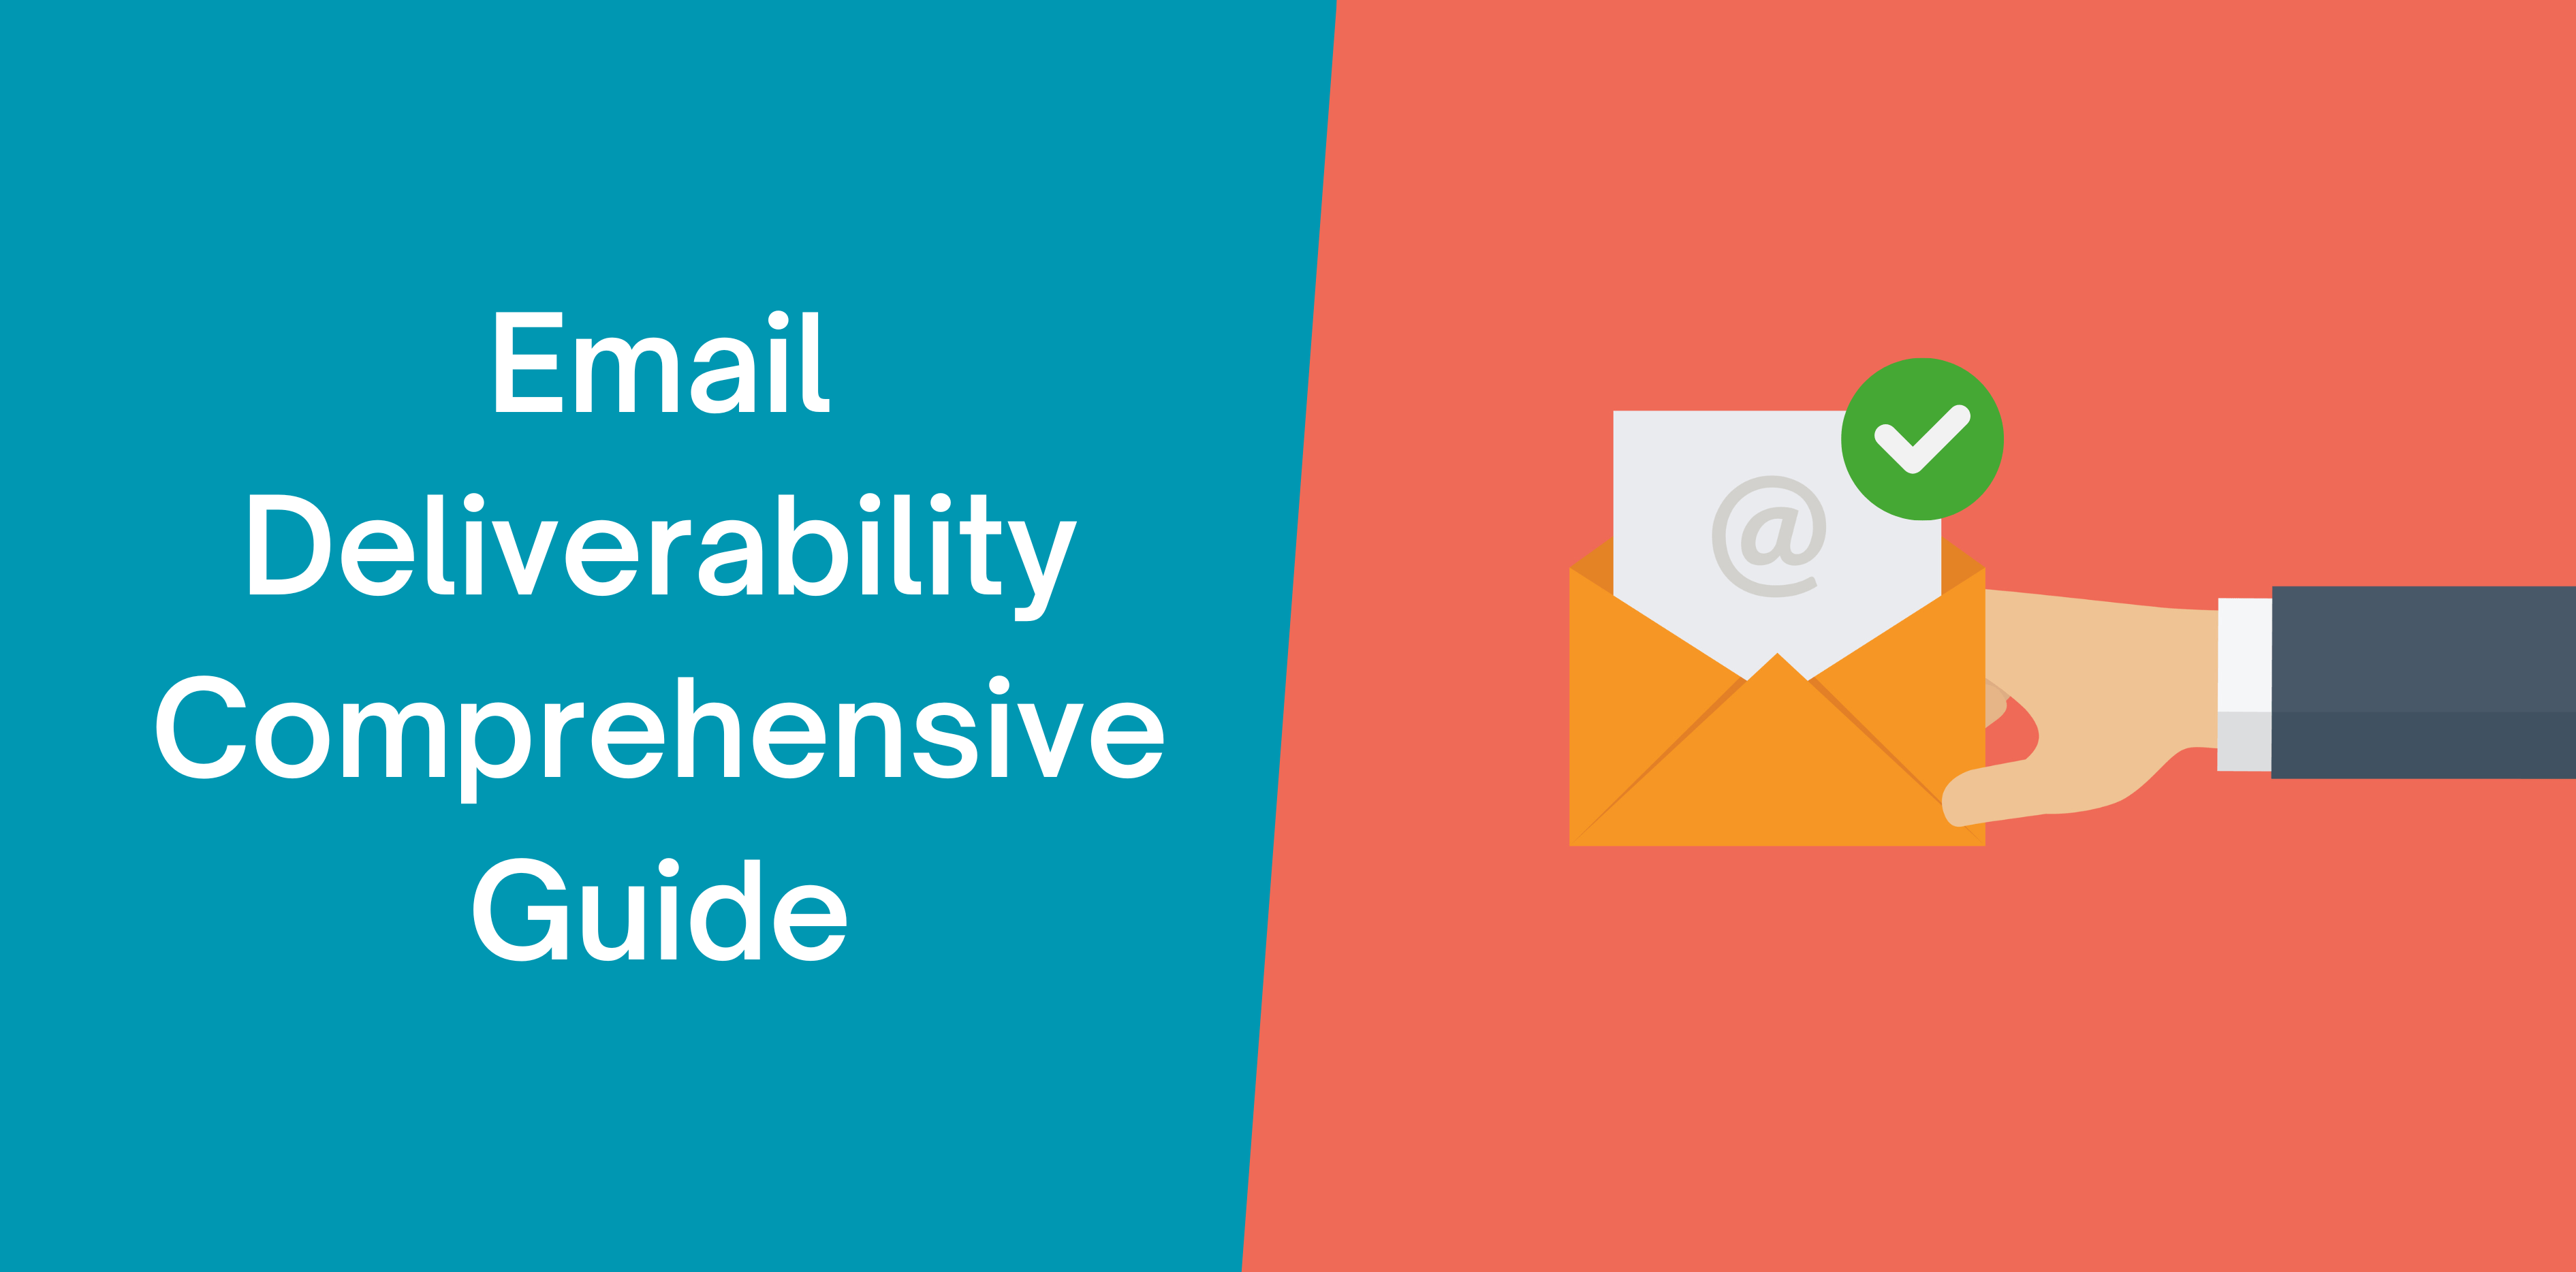 Thumbnail-Email-Deliverability-Comprehensive-Guide